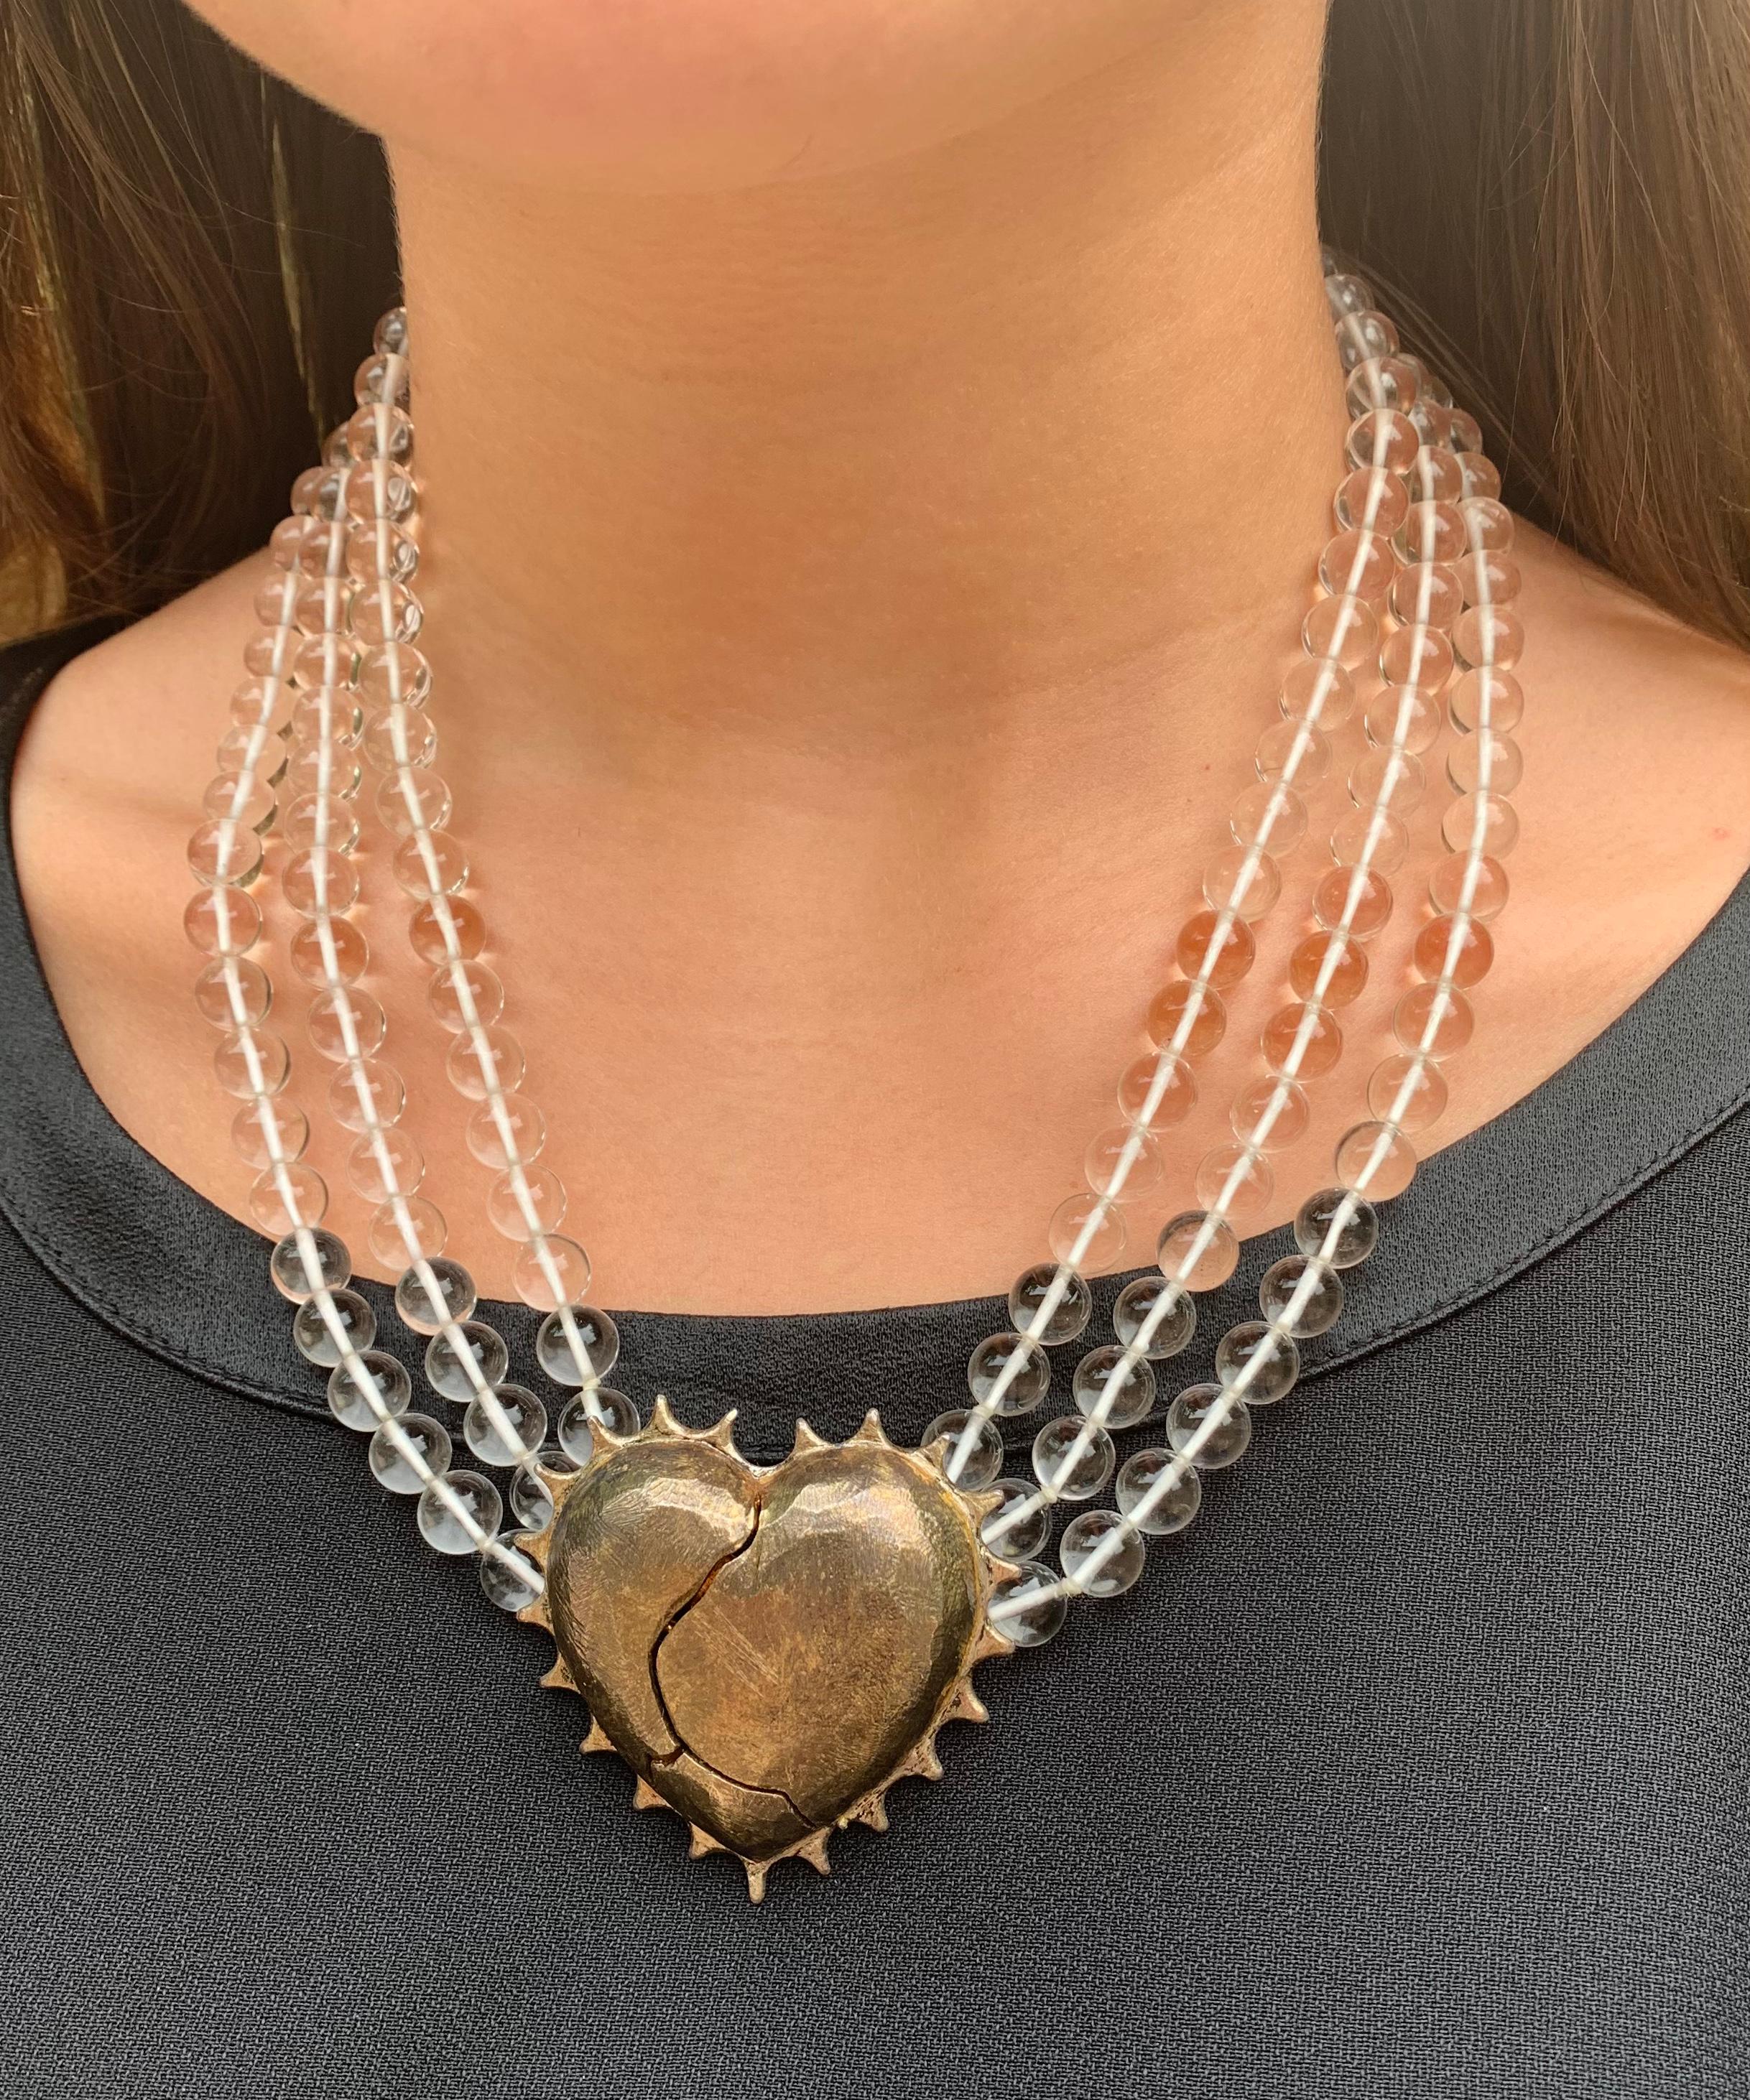 Estate Coup de Foudre/Love at First Sight statement necklace by Kerry MacBride.
Rock crystal and patinated hand wrought sterling silver necklace
centered by a large 50mm by 50mm stylized patinated hand wrought sterling silver heart rendered as